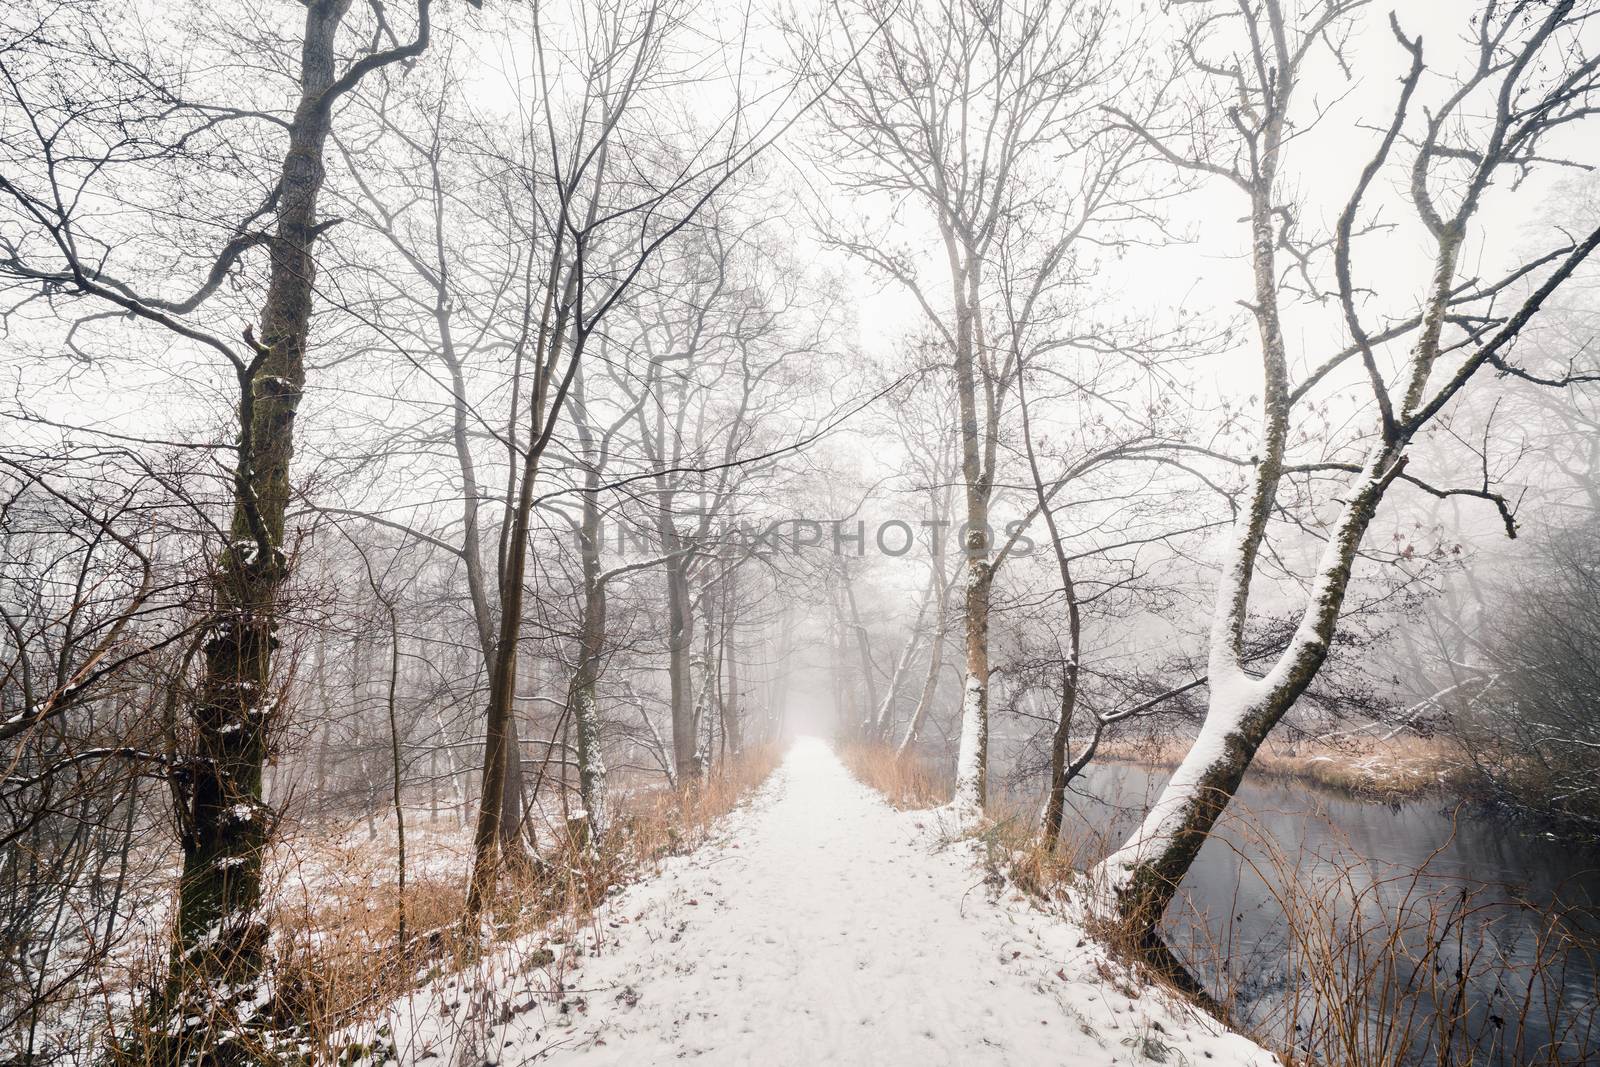 Snowy trail in a misty forest with a river on the right side in the winter